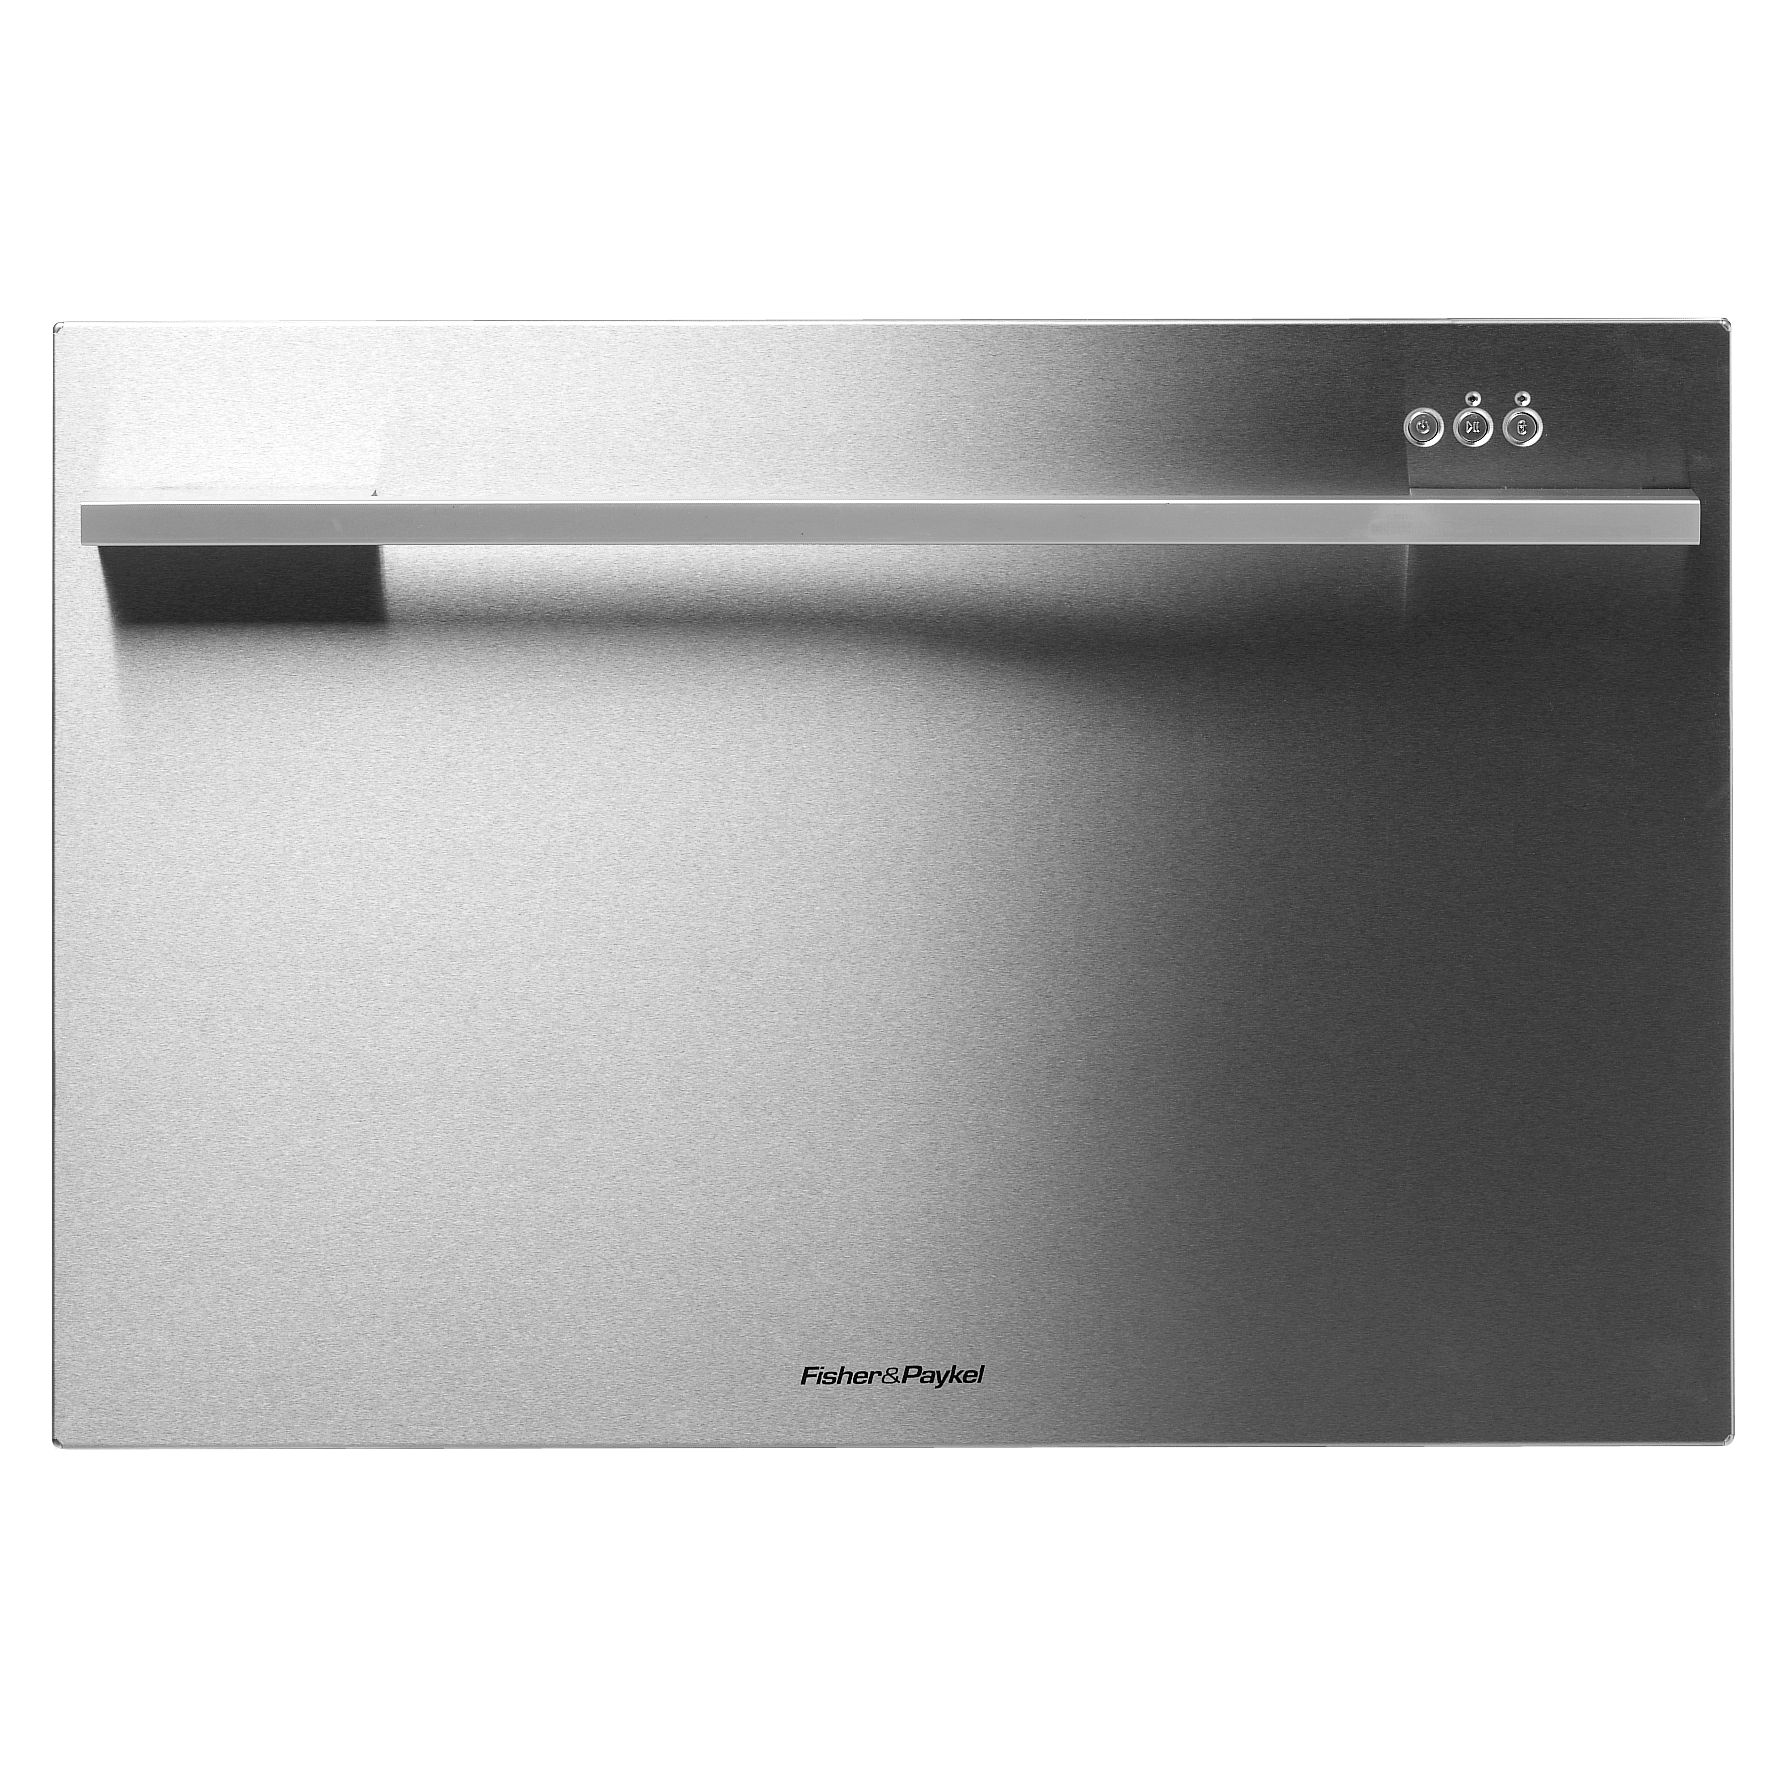 Fisher & Paykel DD60SDFHX6 Built-in Dishwasher, Stainless Steel at John Lewis